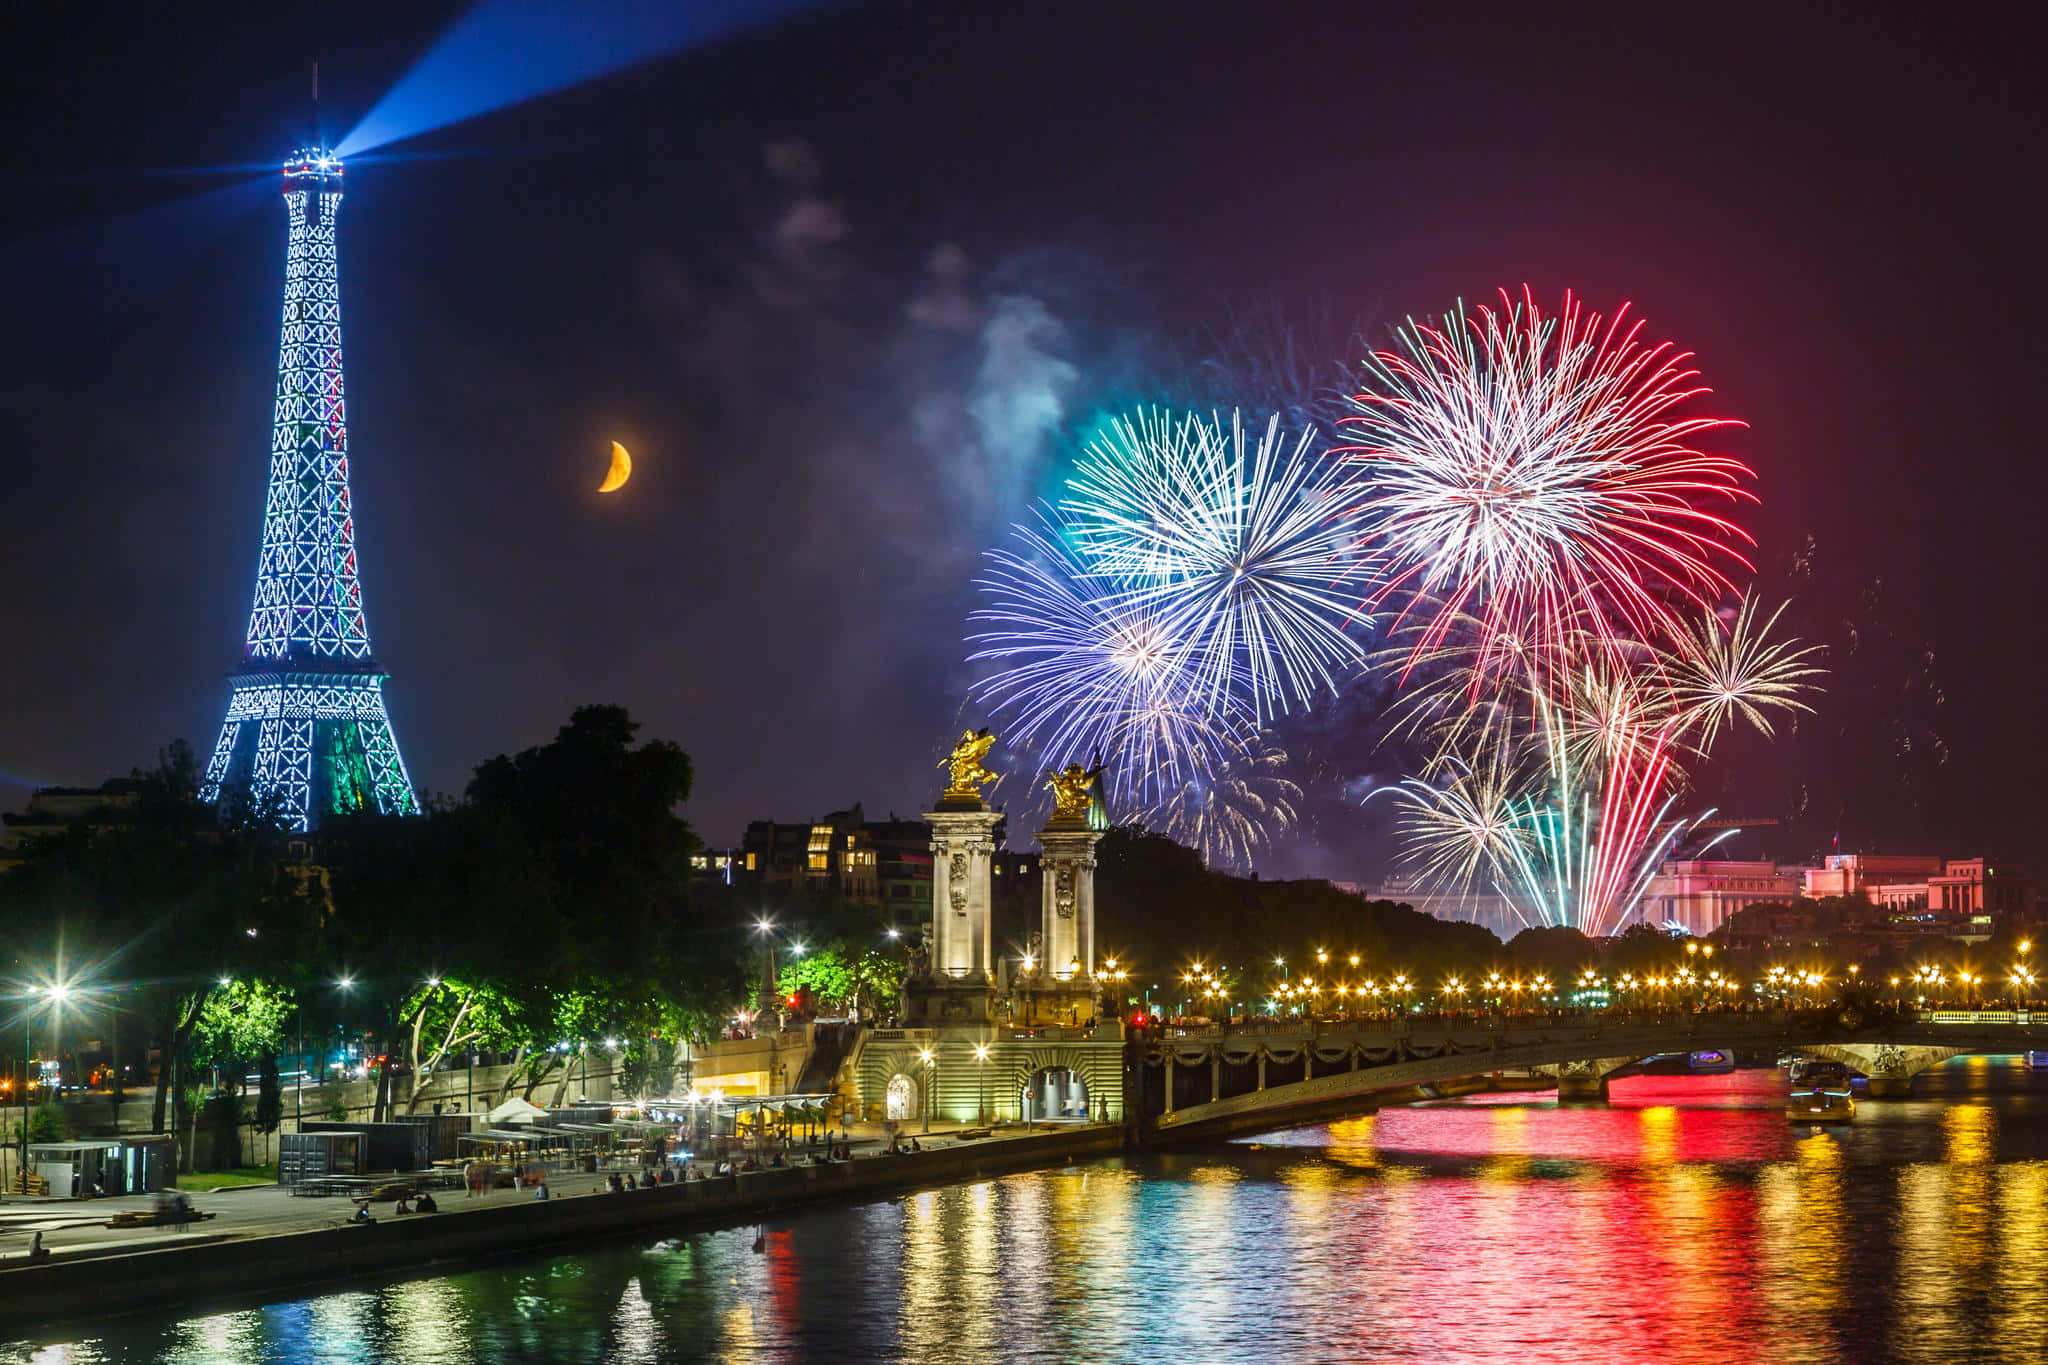 Enjoy the magical view of the Eiffel Tower at night